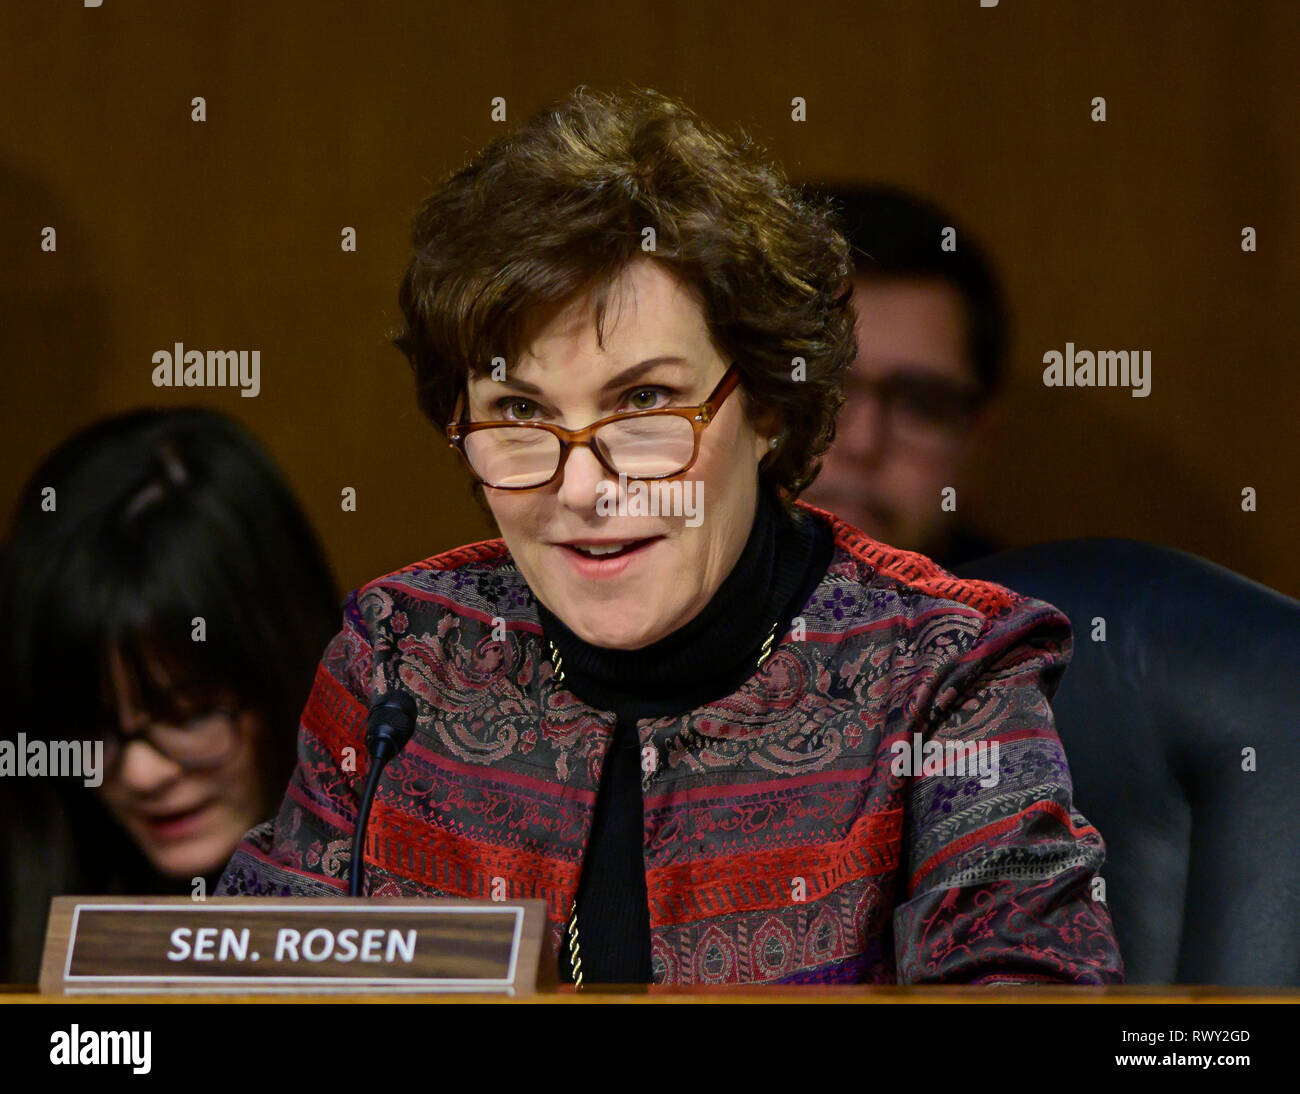 United States Senator Jacky Rosen (Democrat of Nevada) questions witnesses as they testify before the US Senate Committee on Homeland Security and Governmental Affairs Permanent Subcommittee on Investigations during a hearing on 'Examining Private Sector Data Breaches' on Capitol Hill in Washington, DC on Thursday, March 7, 2019. Credit: Ron Sachs/CNP /MediaPunch Stock Photo